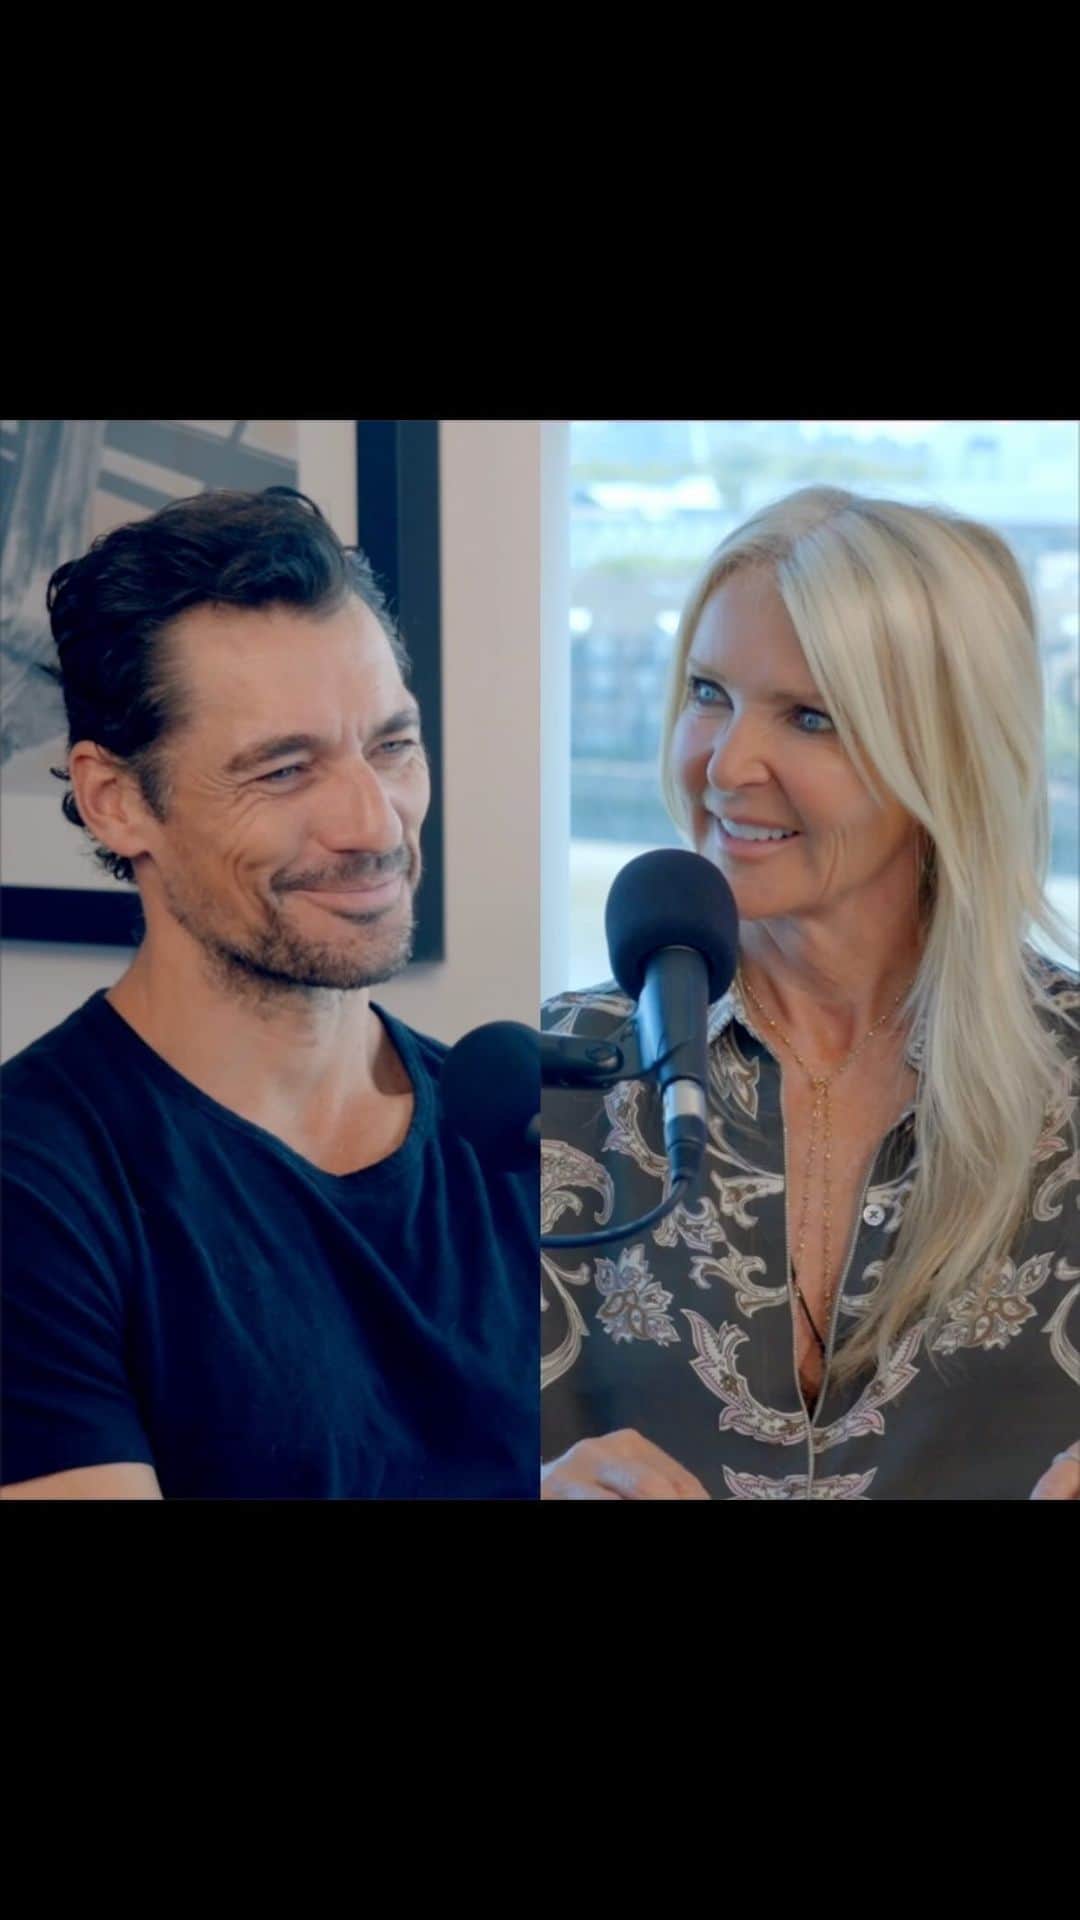 アマンダ ウェイクリーのインスタグラム：「This morning, Season 3 of my podcast Style DNA has gone live with none other than the supermodel that is David Gandy as my guest… I know, it was a tough job interviewing the most famous male supermodel in the world but someone’s got to do it and fortunately for me, and hopefully you, he chose to chat all things Style with me. Thank you @davidgandy_official for trusting me to go on this sartorial journey…   David shot to global recognition wearing a pair of tiny white swimming trunks for the iconic Dolce and Gabbana Light Blue fragrance campaign. The image saw him on a 50 ft billboard in Times Square NY over 20 years ago…we laugh about the value of those tiny white trunks now.   I loved hearing about the inspiration behind his brand @davidgandywellwear which he created during lockdown, which combines his passion for style and well-being with responsibly sourced garments … did you know that fabrics can now be infused with anti-bacterial, anti-odour or moisturising qualities?  He openly discusses the challenges of the fashion industry in this post-pandemic, post-Brexit, cost-of-living-crisis-world that we are inhabiting.   We talk about male body image, grooming, style icons and so much more …   Do click on the link in my bio to listen or even better please press the SUBSCRIBE link on whichever platform you get your podcasts from…it doesn’t cost a penny to do but it helps me hugely with my ratings …and as the ratings improve so does everything else connected to the podcast…so thank you for your support.   I sincerely hope you enjoy this next season as much as I have creating it.   Sending love Ax  #Amandawakeley #season3 #davidgandy #malesupermodel #davidgandywellwear #amandawakeleystyledna #LivesBehindTheLooks #fashionpodcast #podcast #model #dolcegabbana」